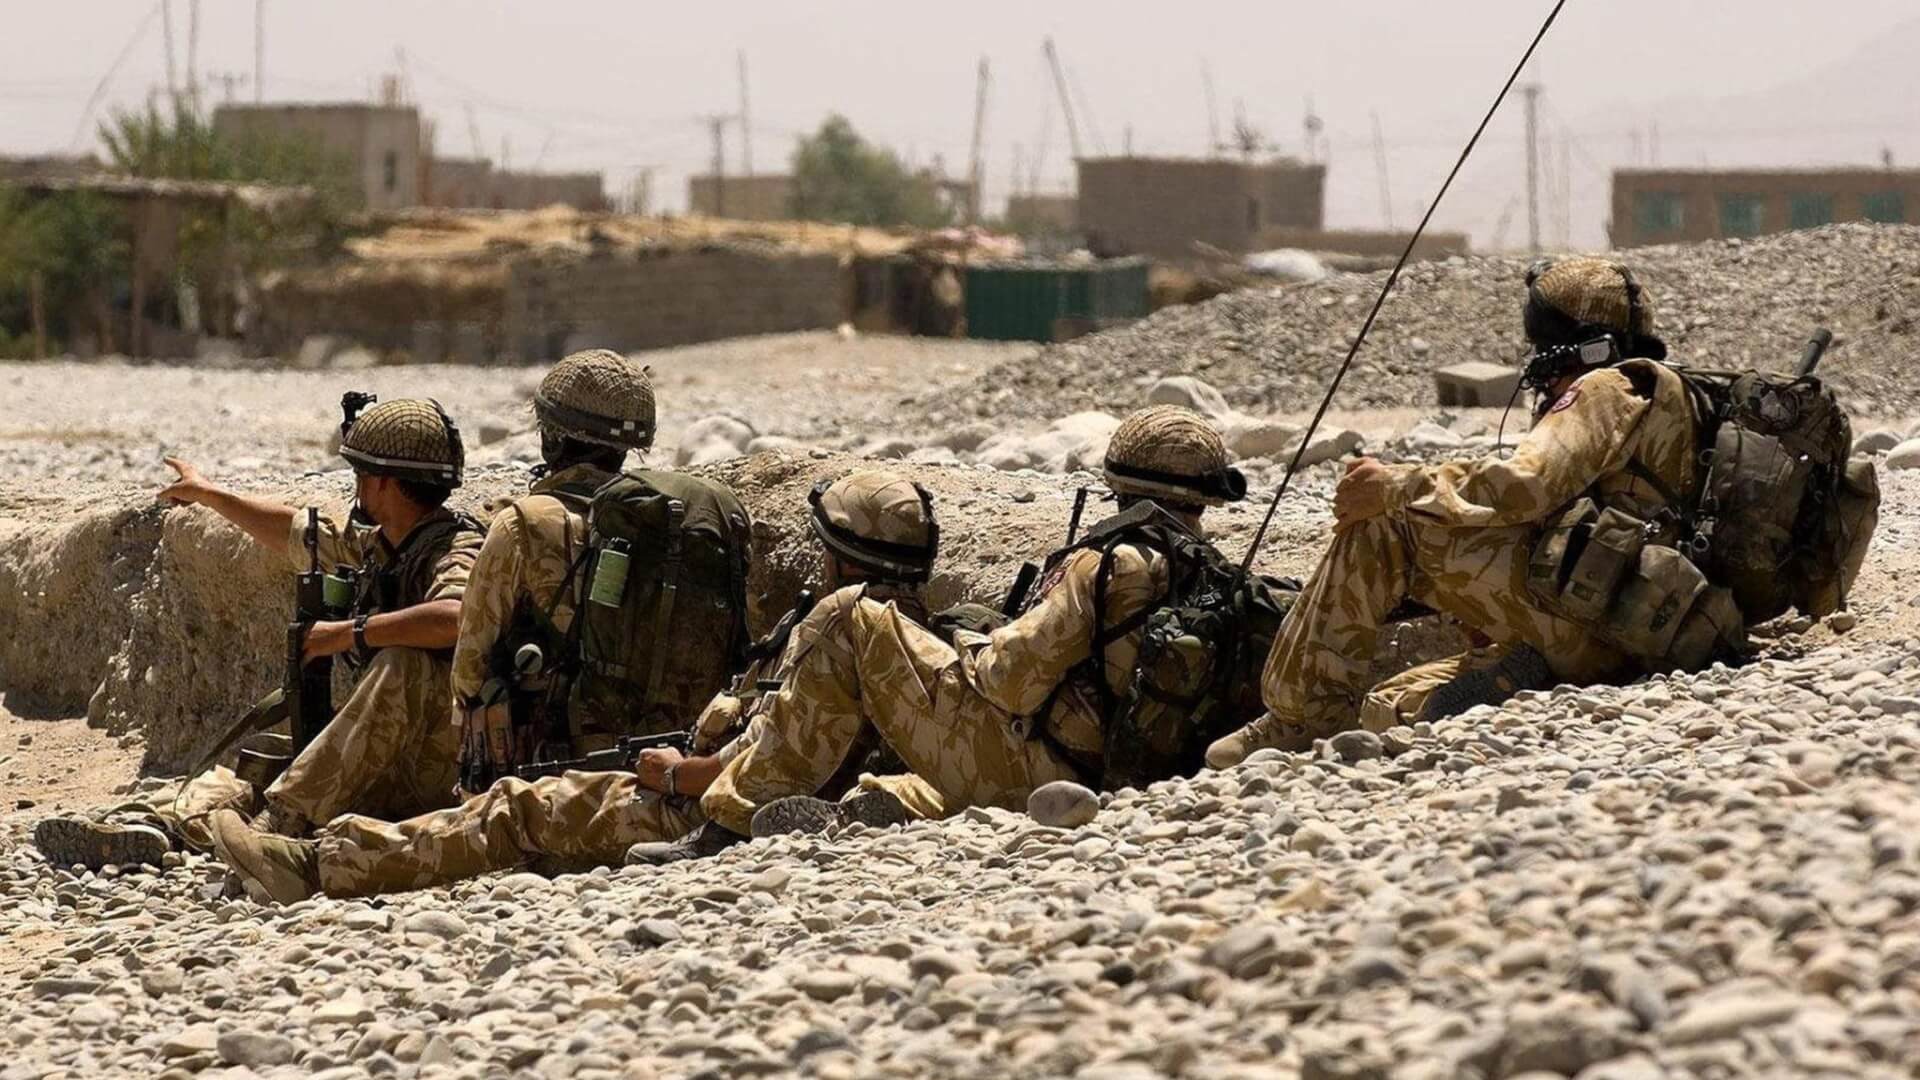 Whistleblower Blasts UK’s ‘Chaotic’ Afghan Evacuation, Only 5% of Applications Approved